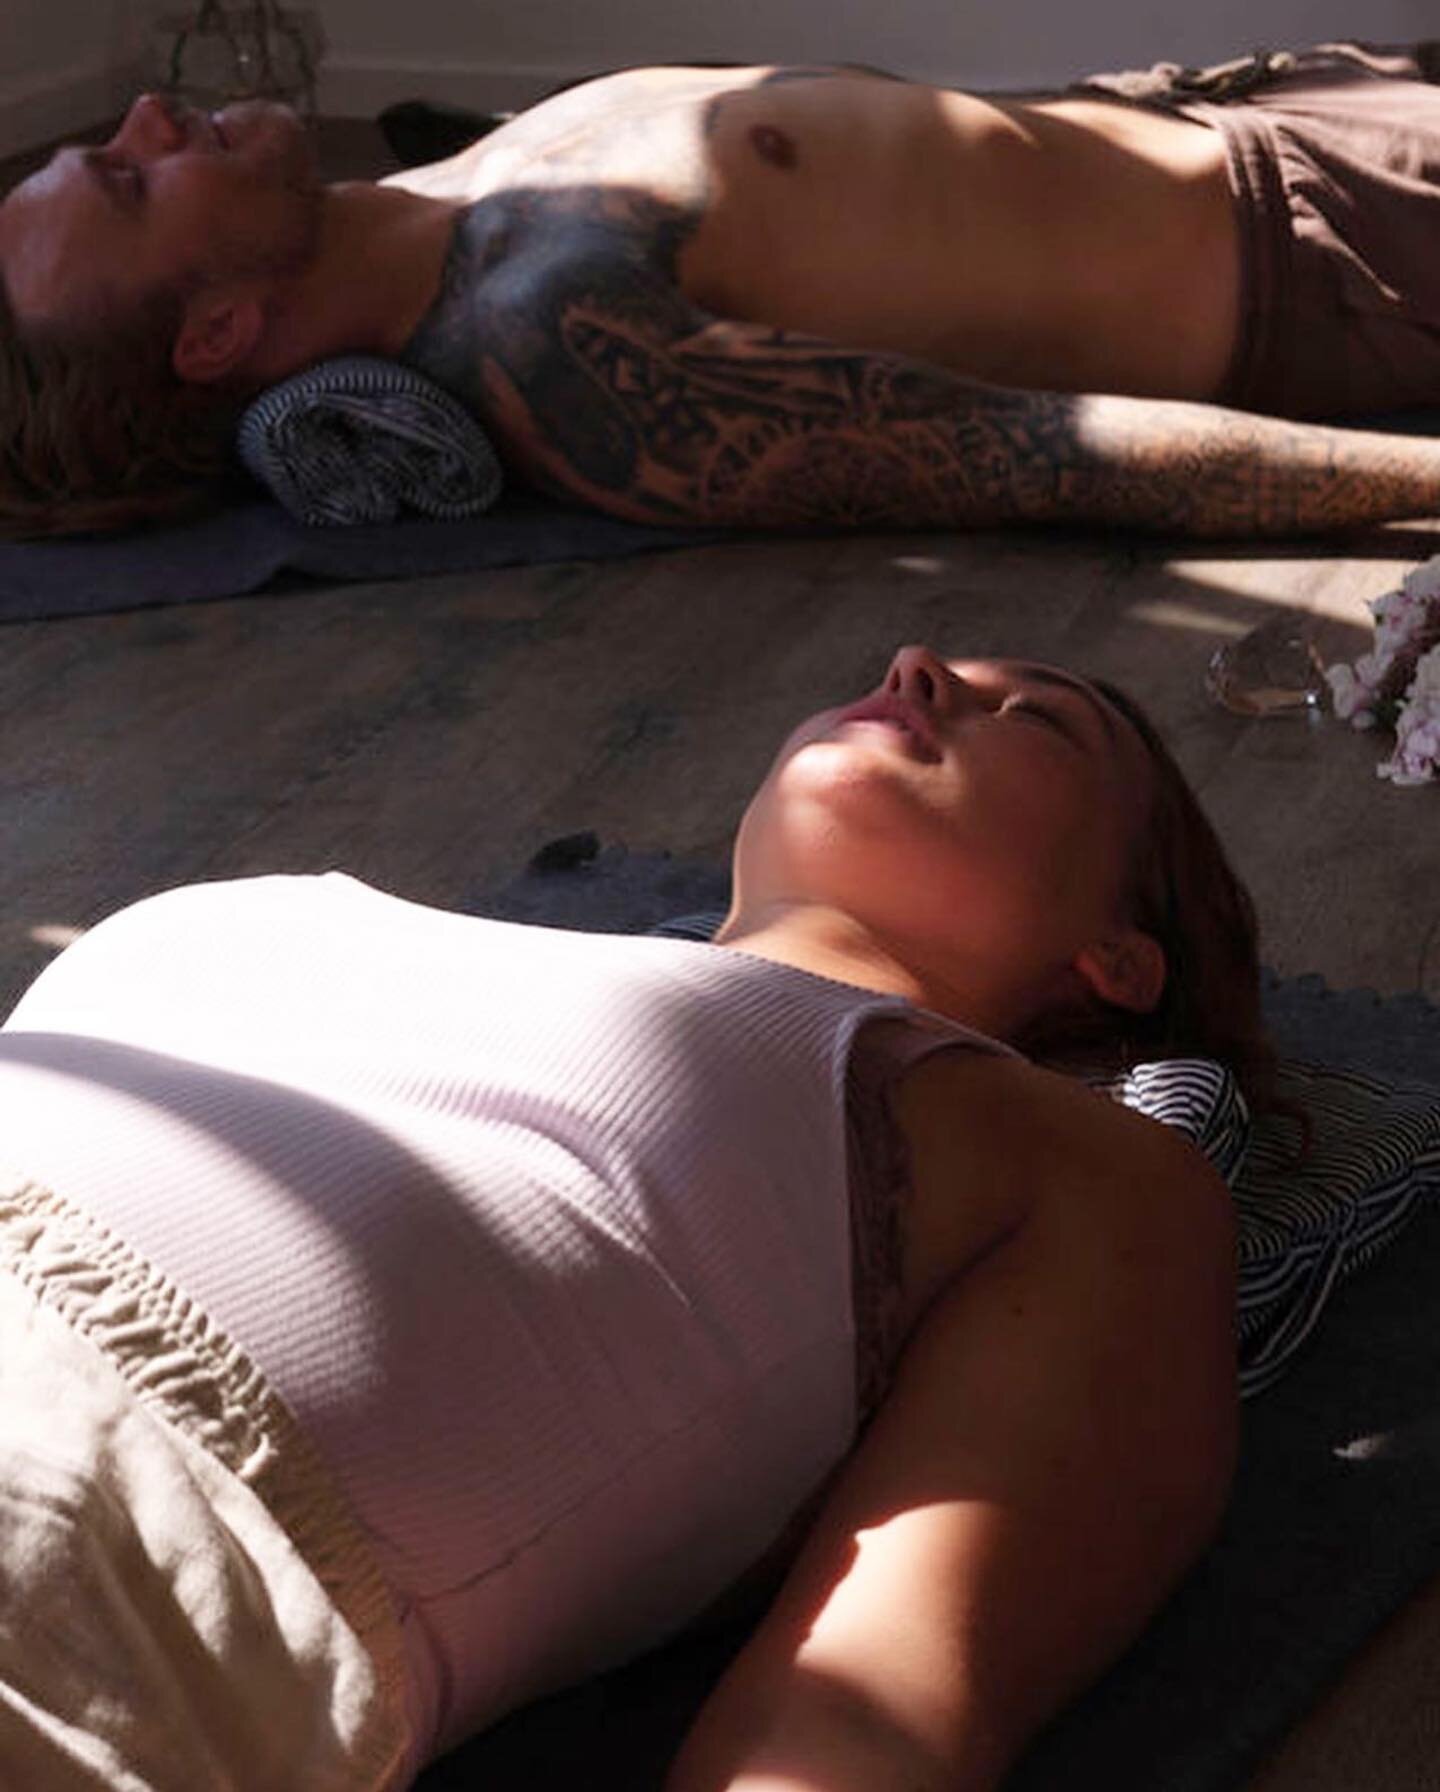 BREATHWORK P&Aring; BORNHOLM D 25 MARTS 🥰

Del genre med vencer p&aring; solskins &oslash;en ❤️

COME JOIN FOR A WORKSHOP WITH SELF CARE, CEREMONIAL CACAO AND DEEP BREATHWORK JAN 22✨
.
The breath reminds us of the seamless flow between the two polar